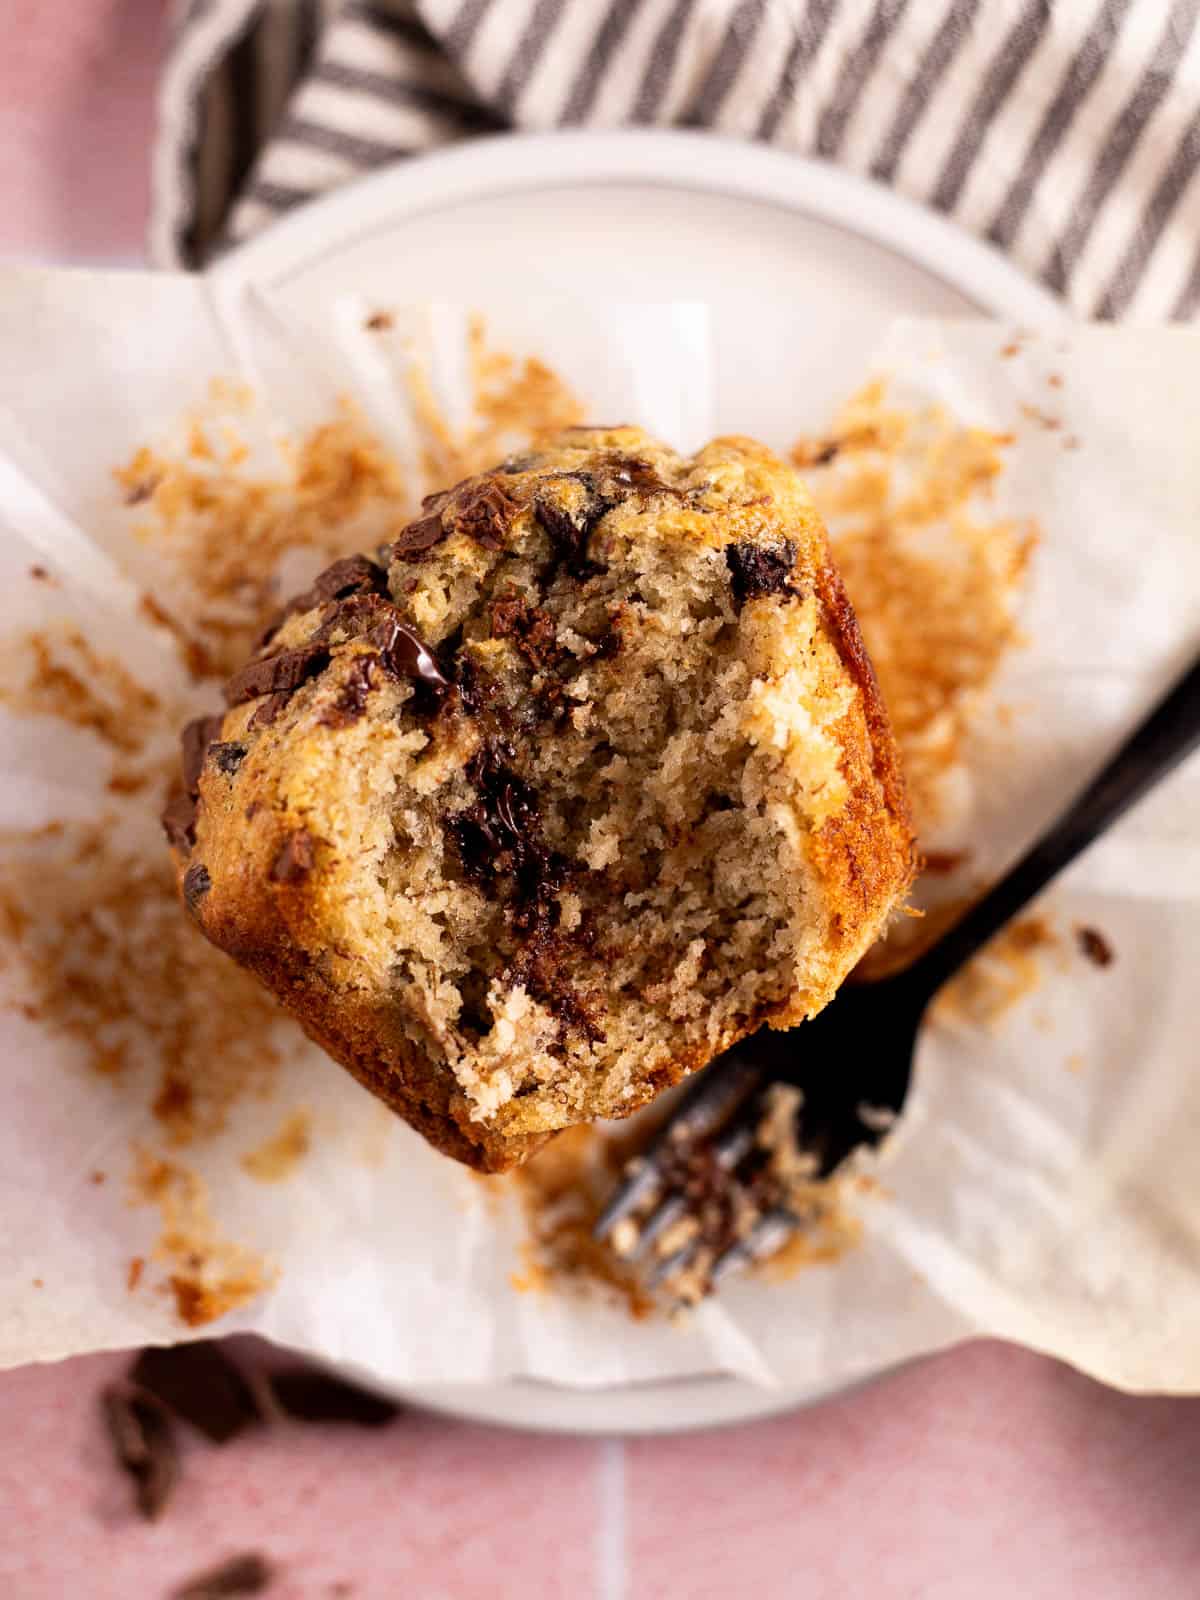 Bakery Style Banana Chocolate Chip Muffin on a white plate with a bite taken out of it.